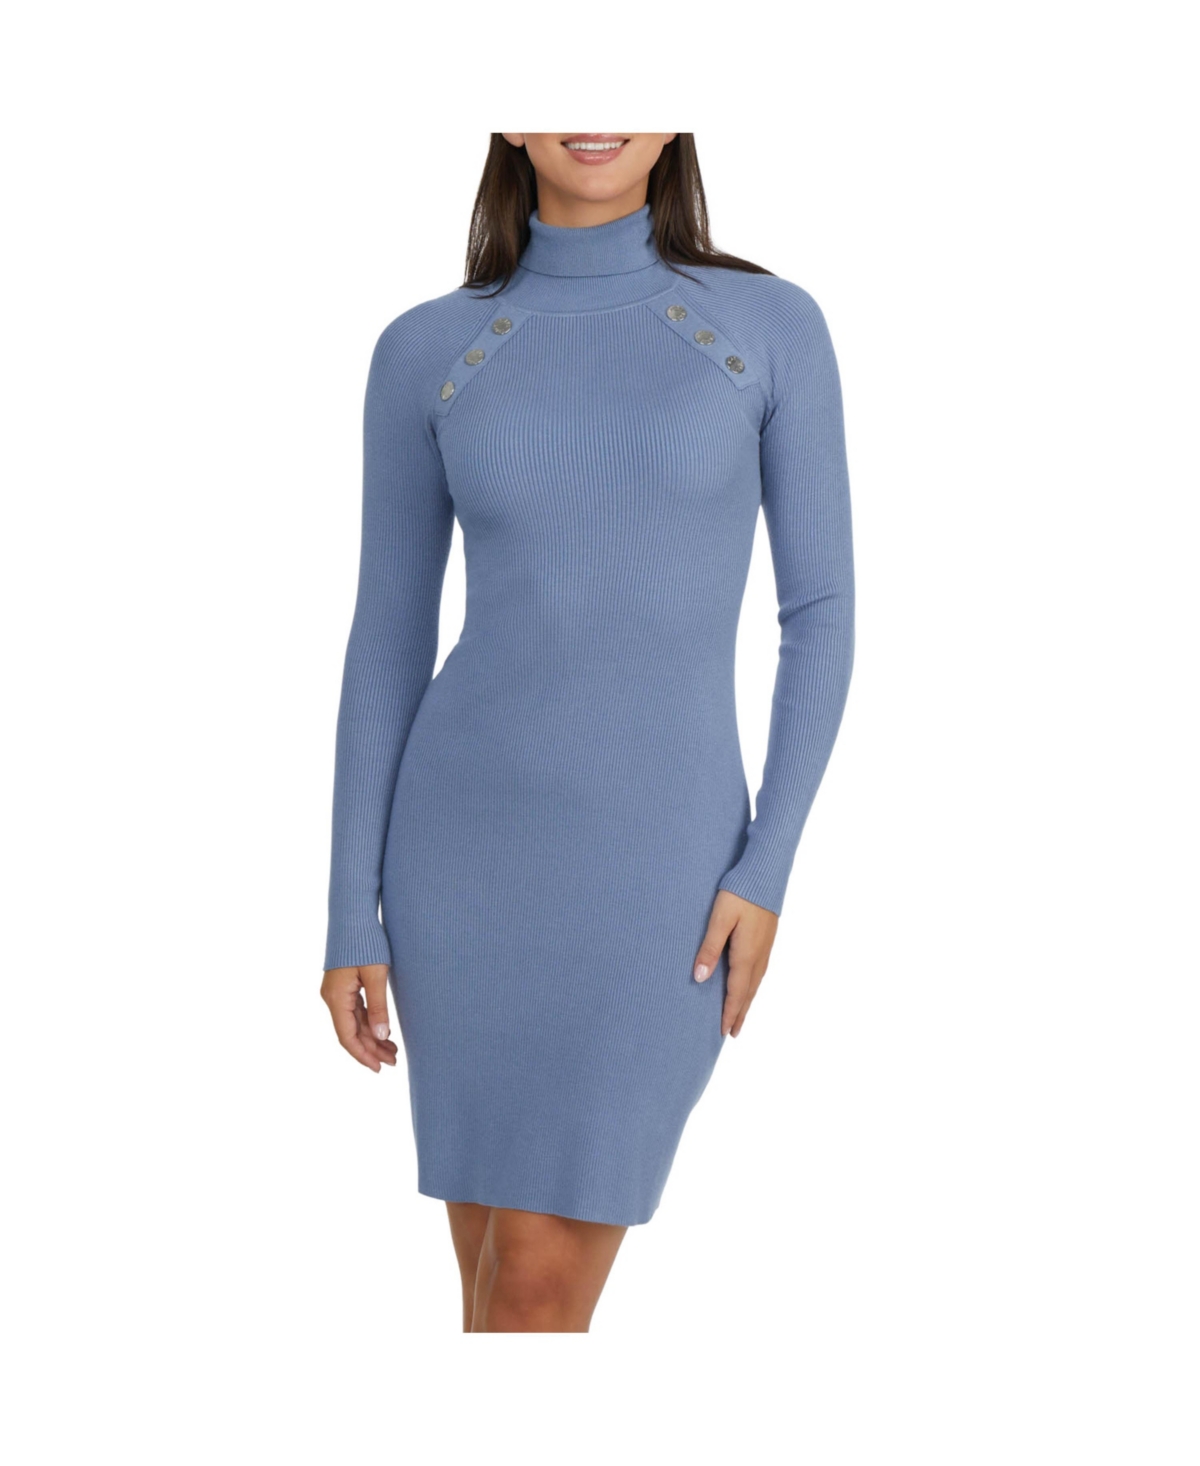 Women's Rib Sweater Dress with a Snap Detail - Dusk blue